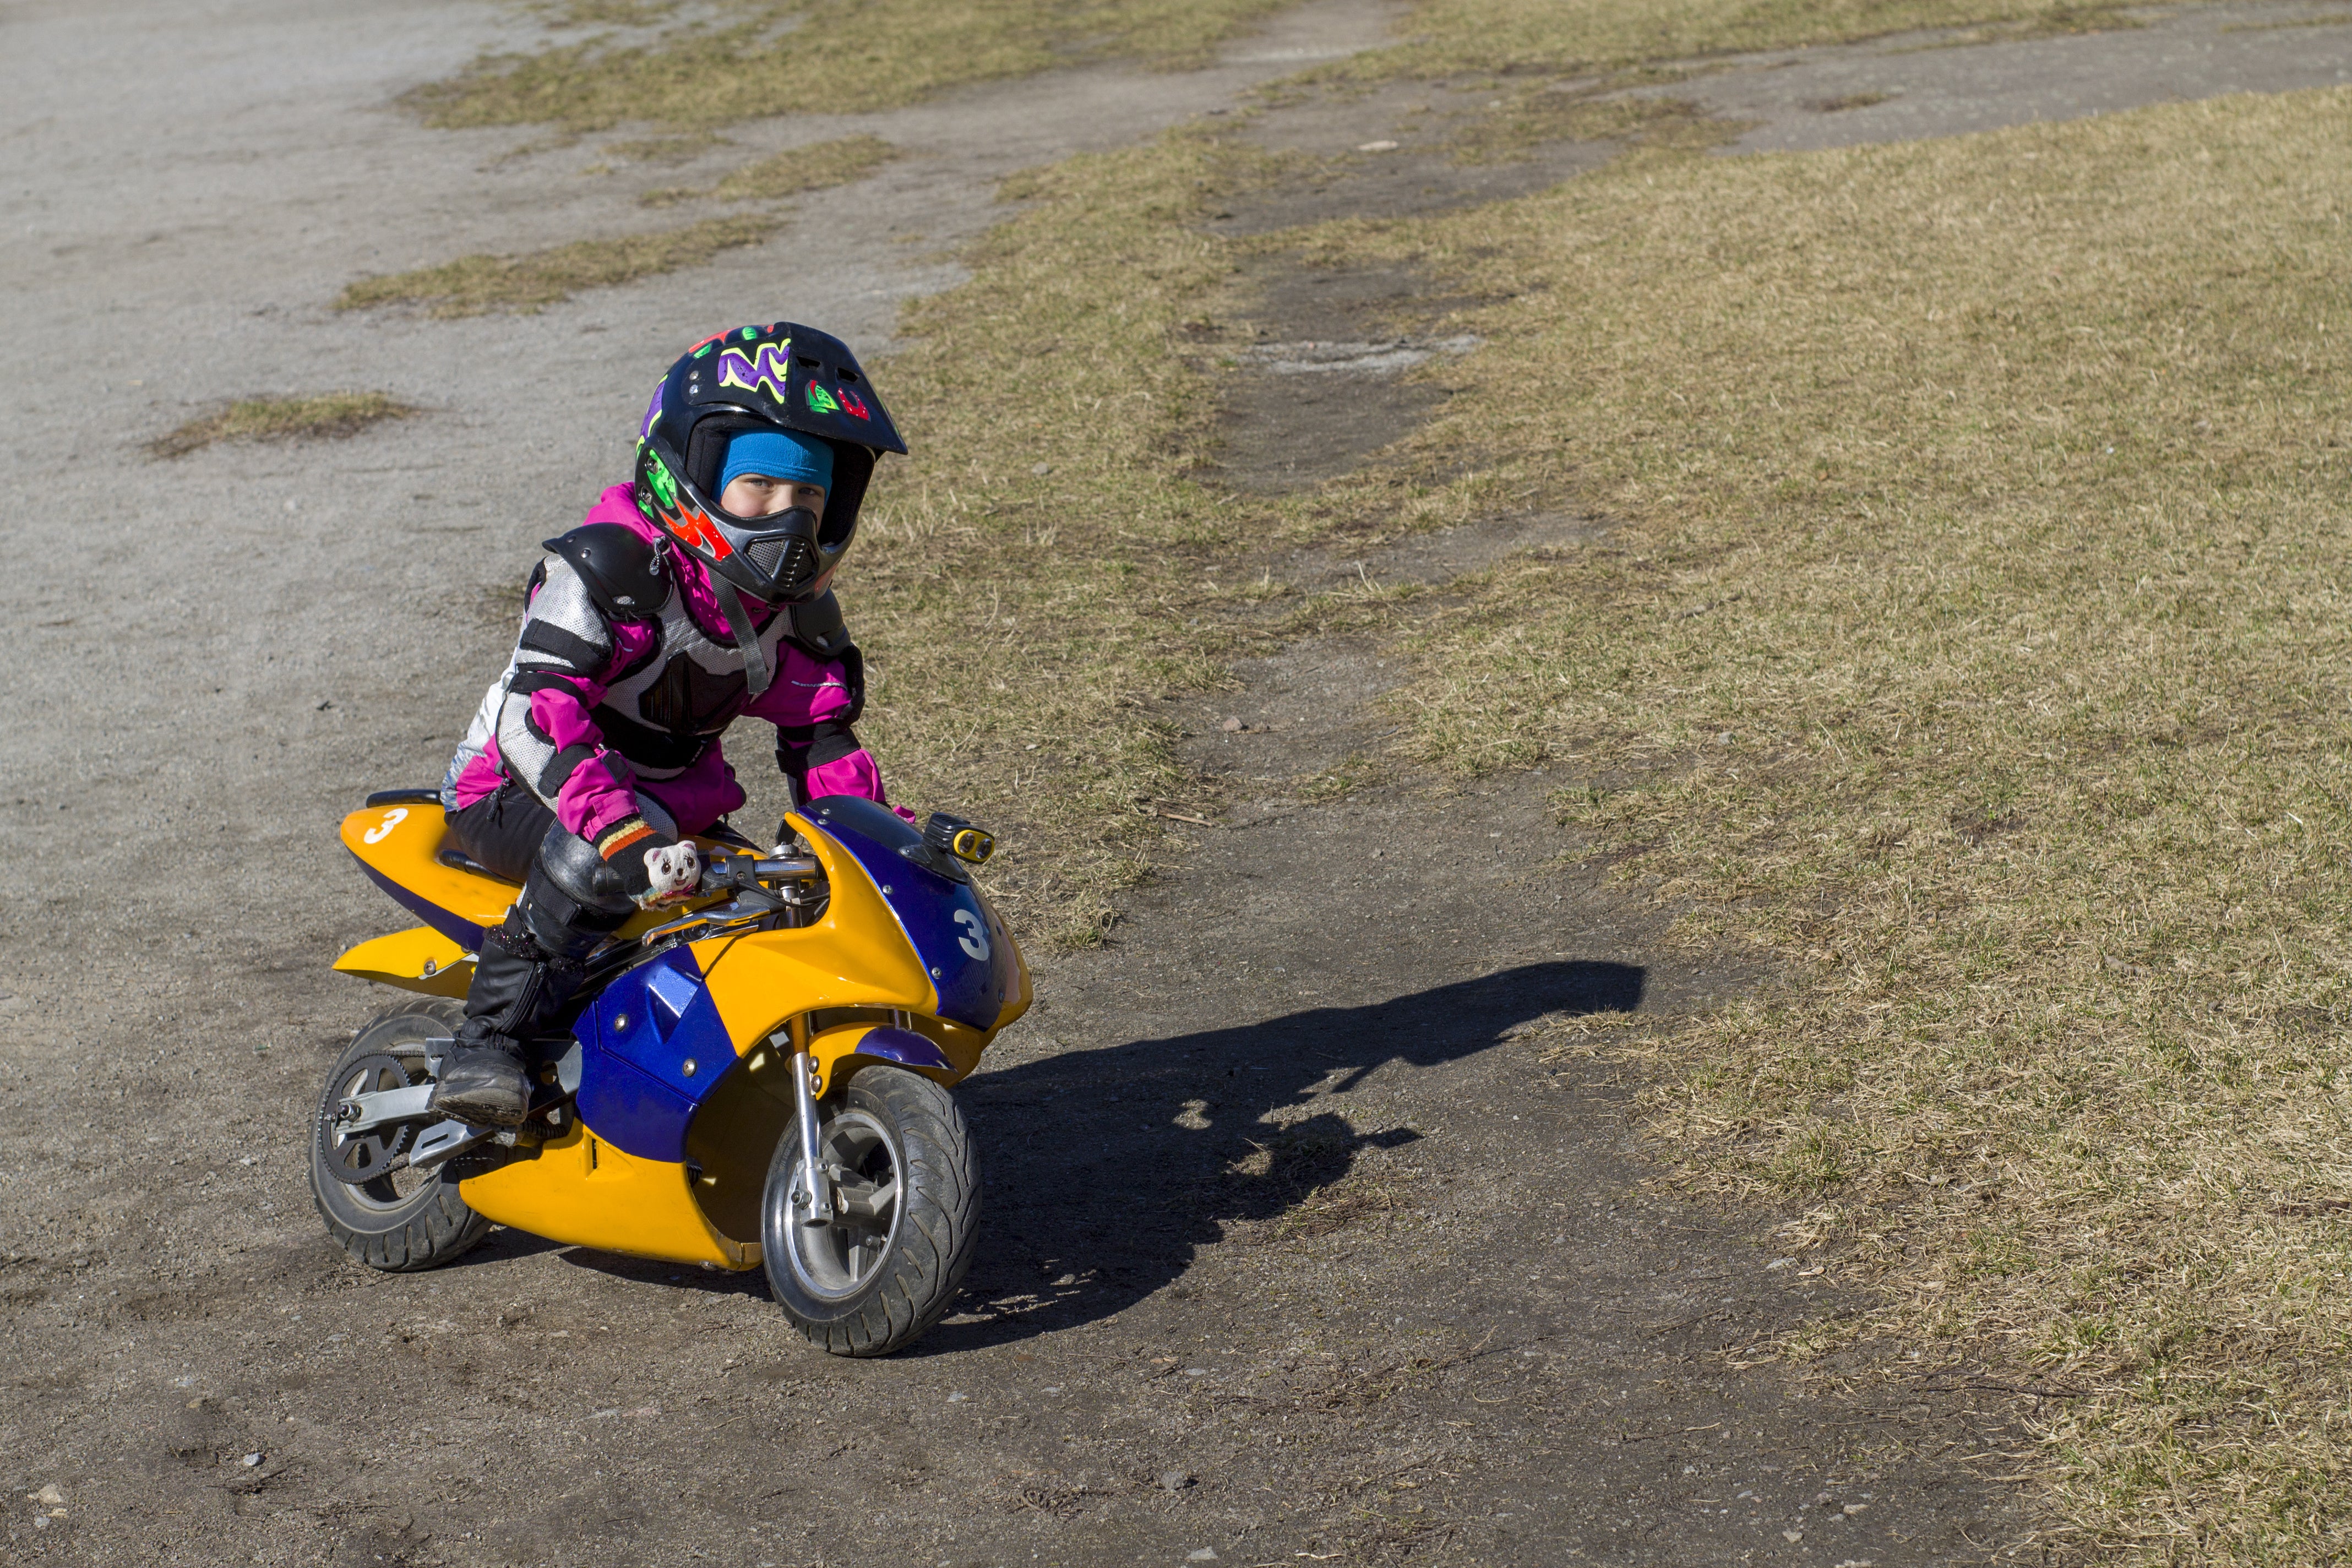 The Pocket Bike For Kids: Are They Worth The Hype?